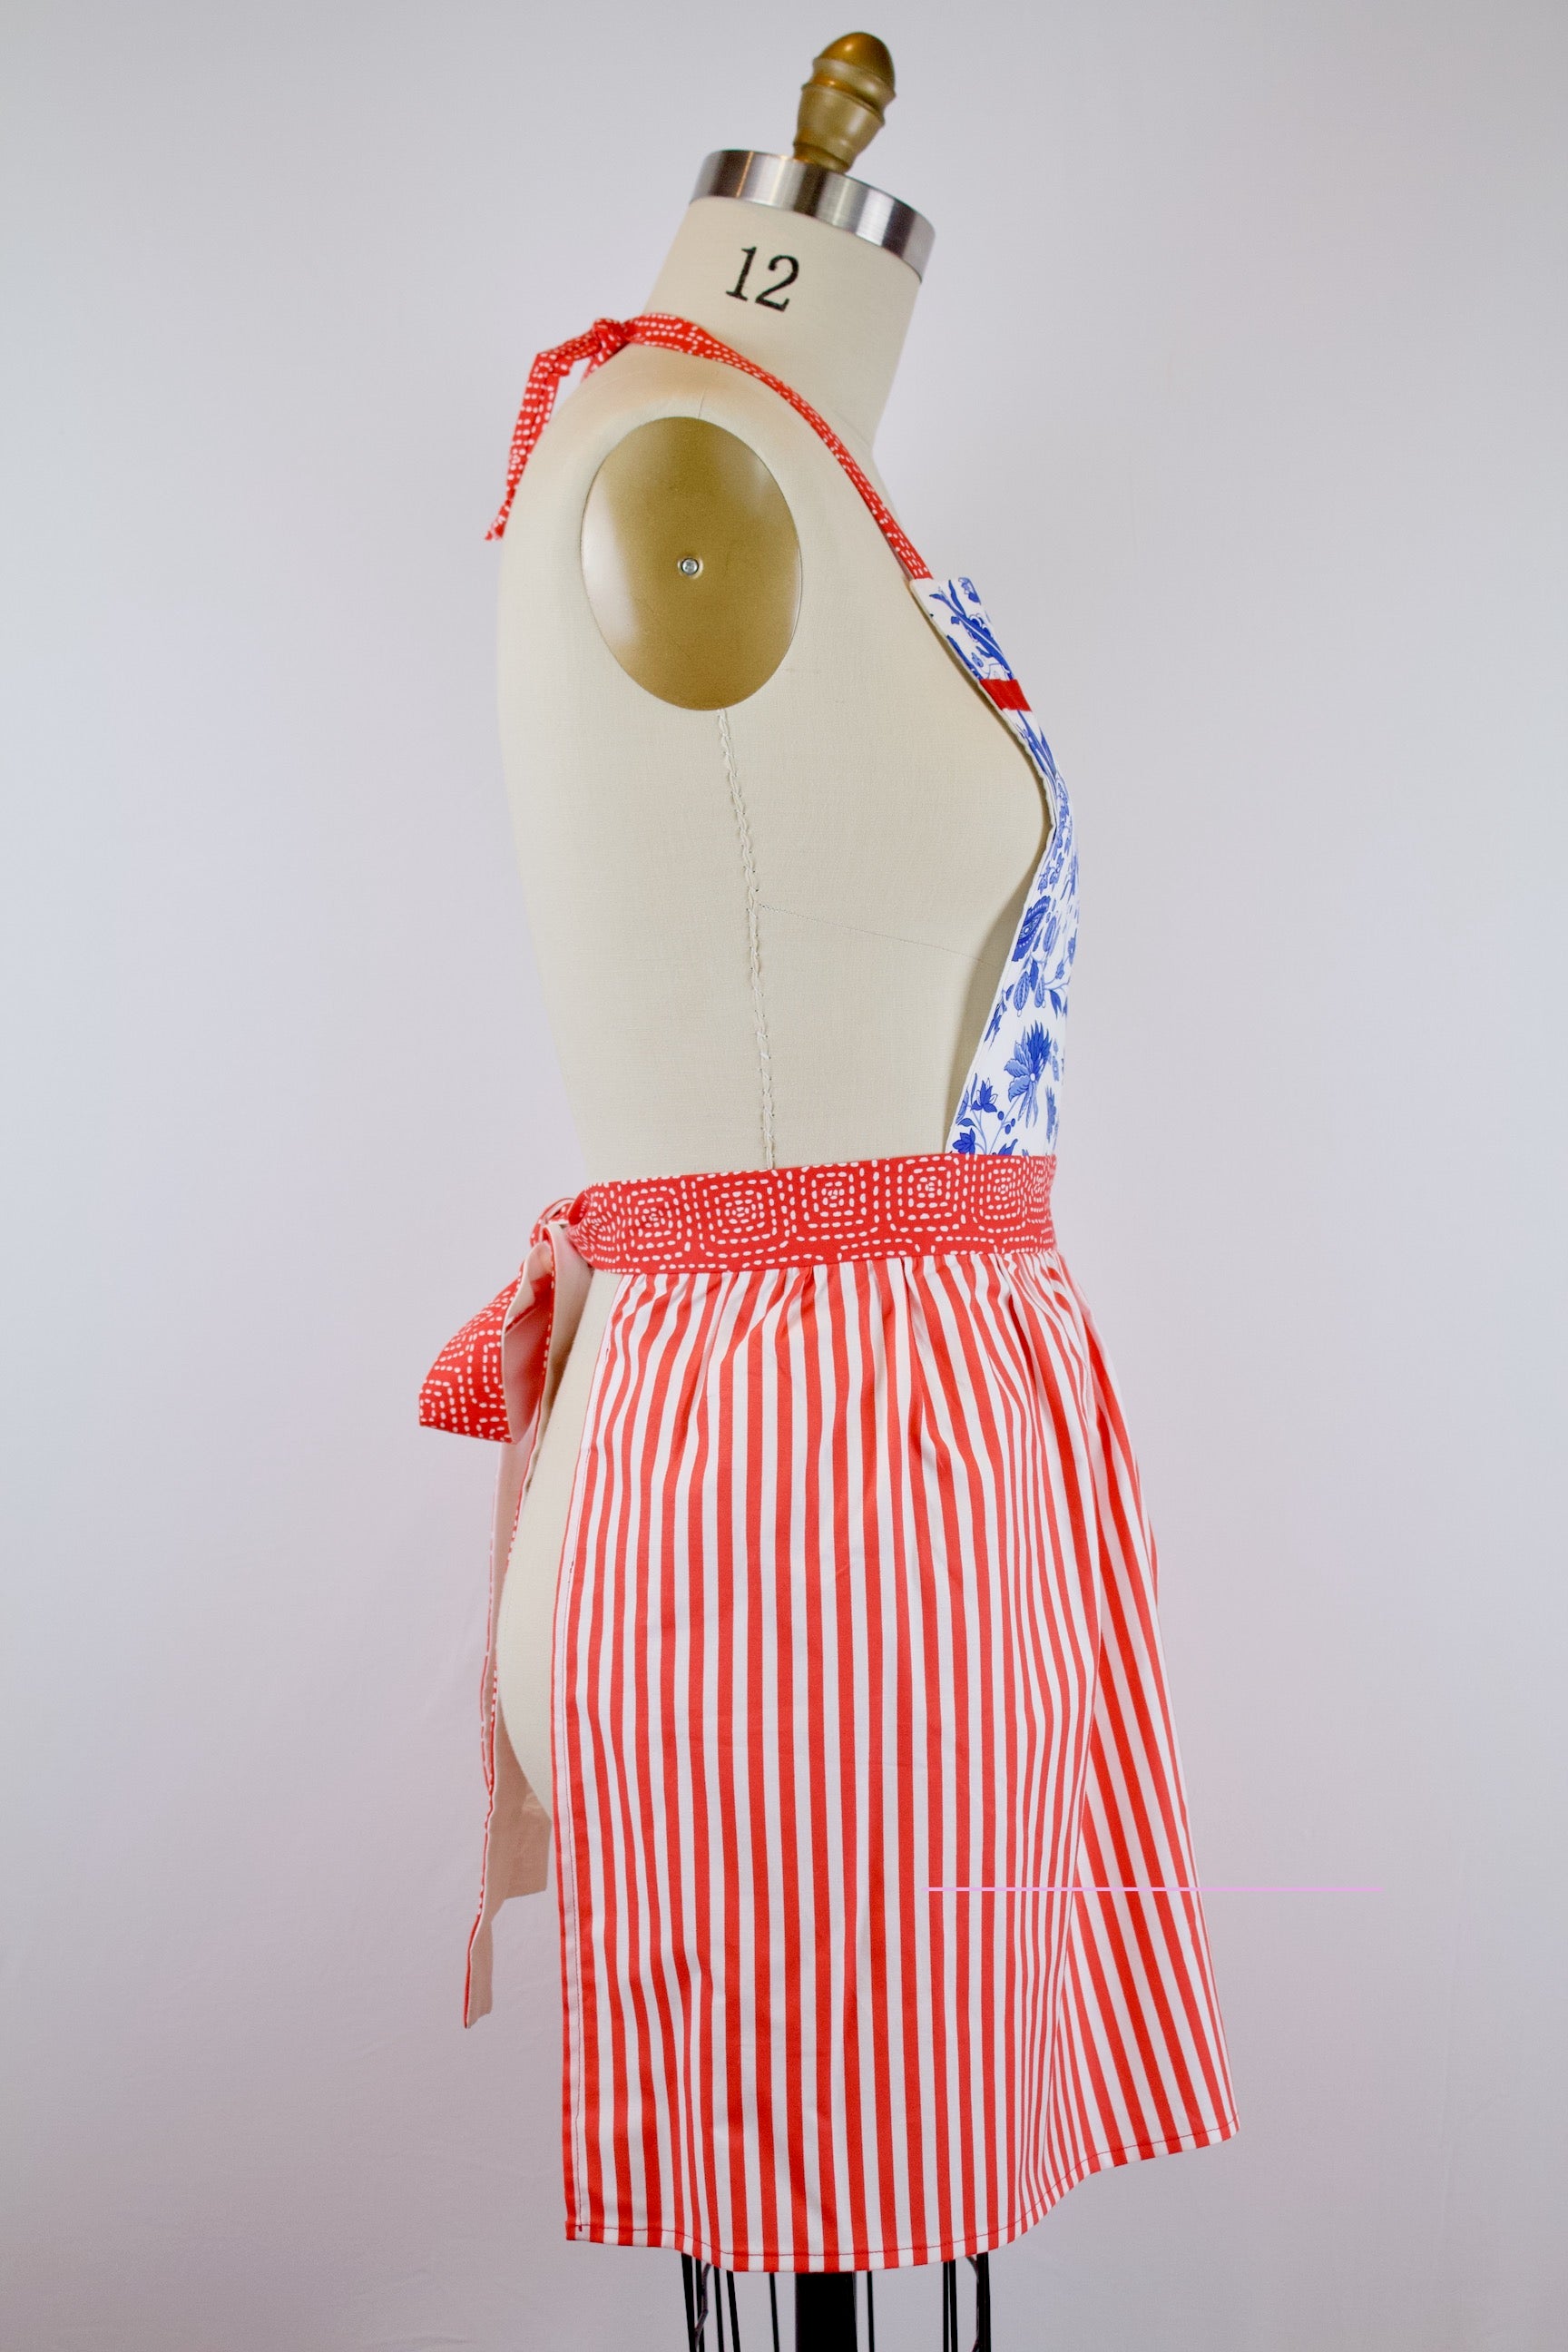 Revolution Vintage Style Apron-The Blue Peony-Age Group_Adult,Apron Style_Vintage Feminine,Category_Apron,Color_Blue,Color_Red,Department_Kitchen,Material_Cotton,Pattern_Floral,Pattern_Stripes,Theme_Summer